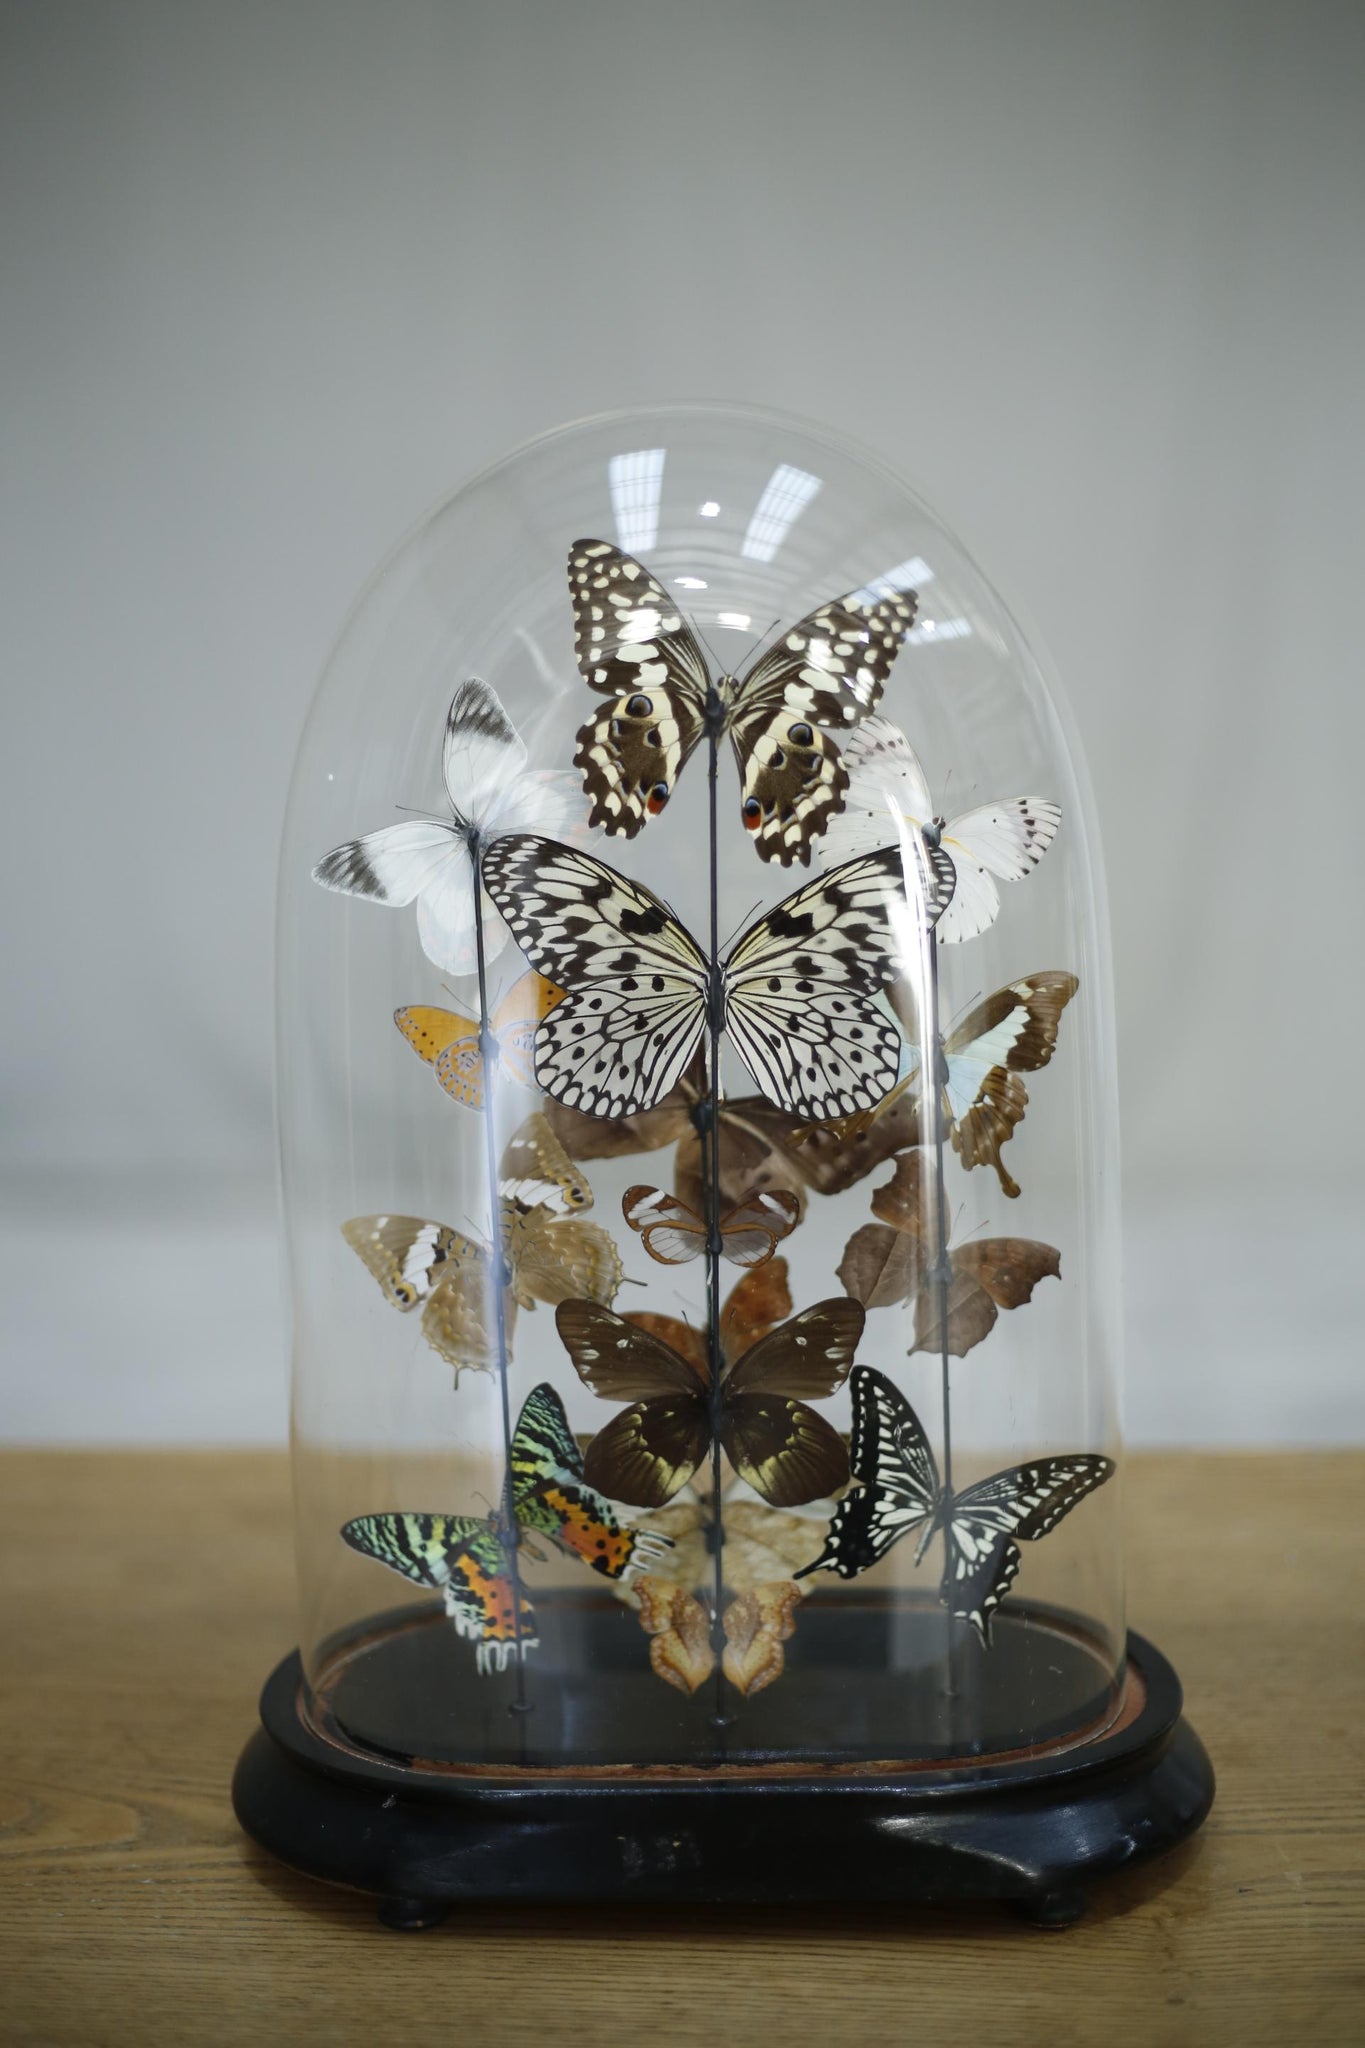 Large glass dome full of vivid butterflies